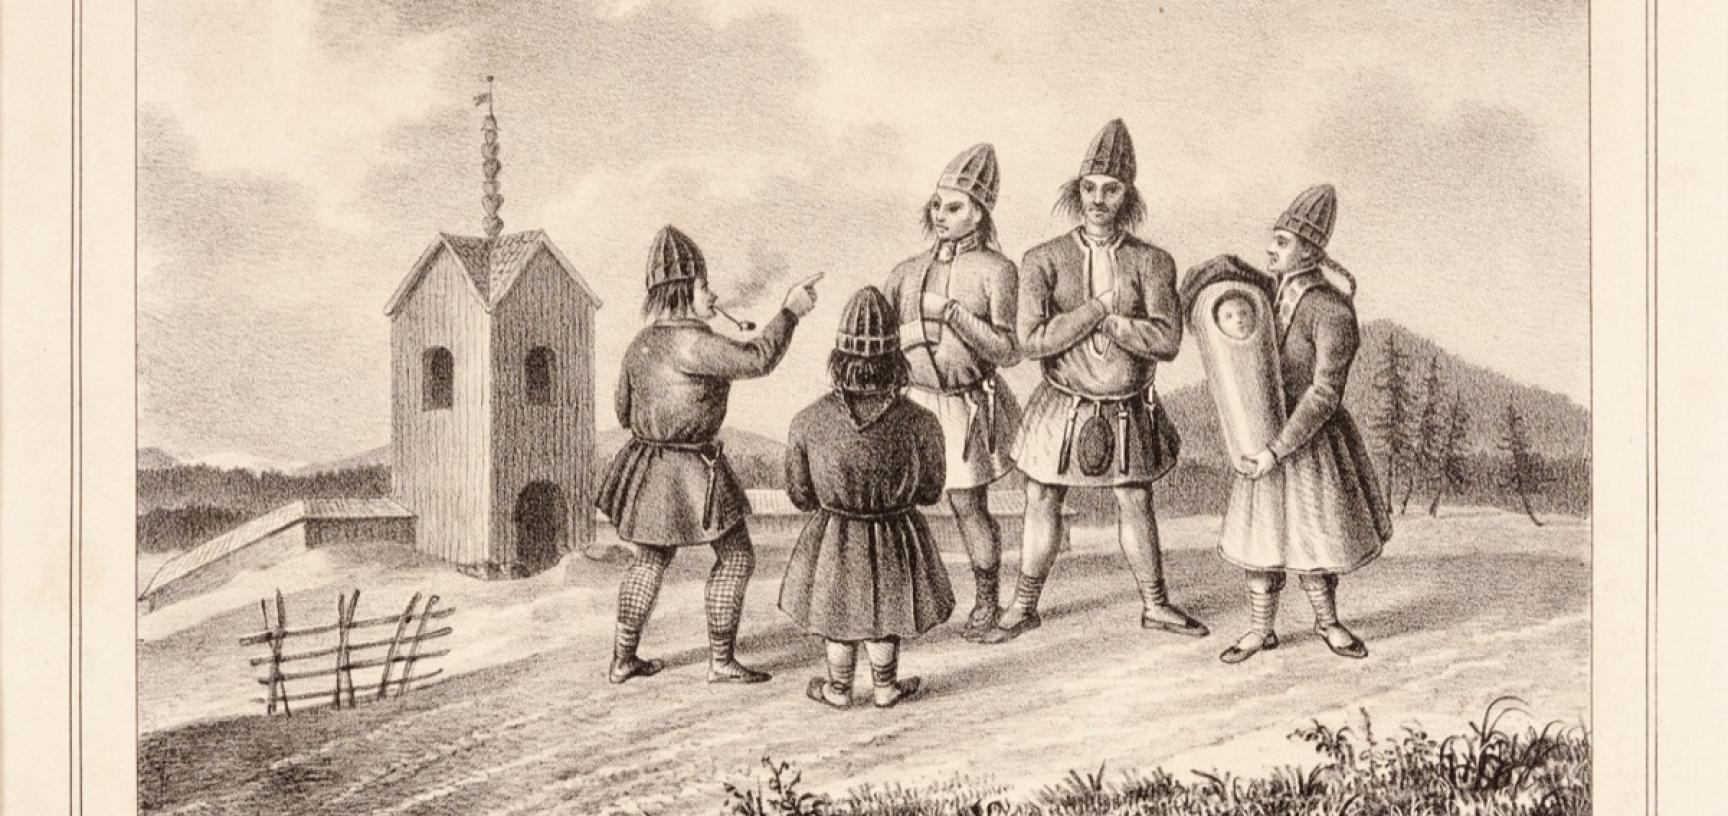 Lithograph produced in Berlin by Hermann Delius, published in 1841, showing a group of five Saami people, one of whom carries a baby, with the old wooden church at Arvidsjaur depicted in the background. (Copyright Pitt Rivers Museum, University of Oxford.